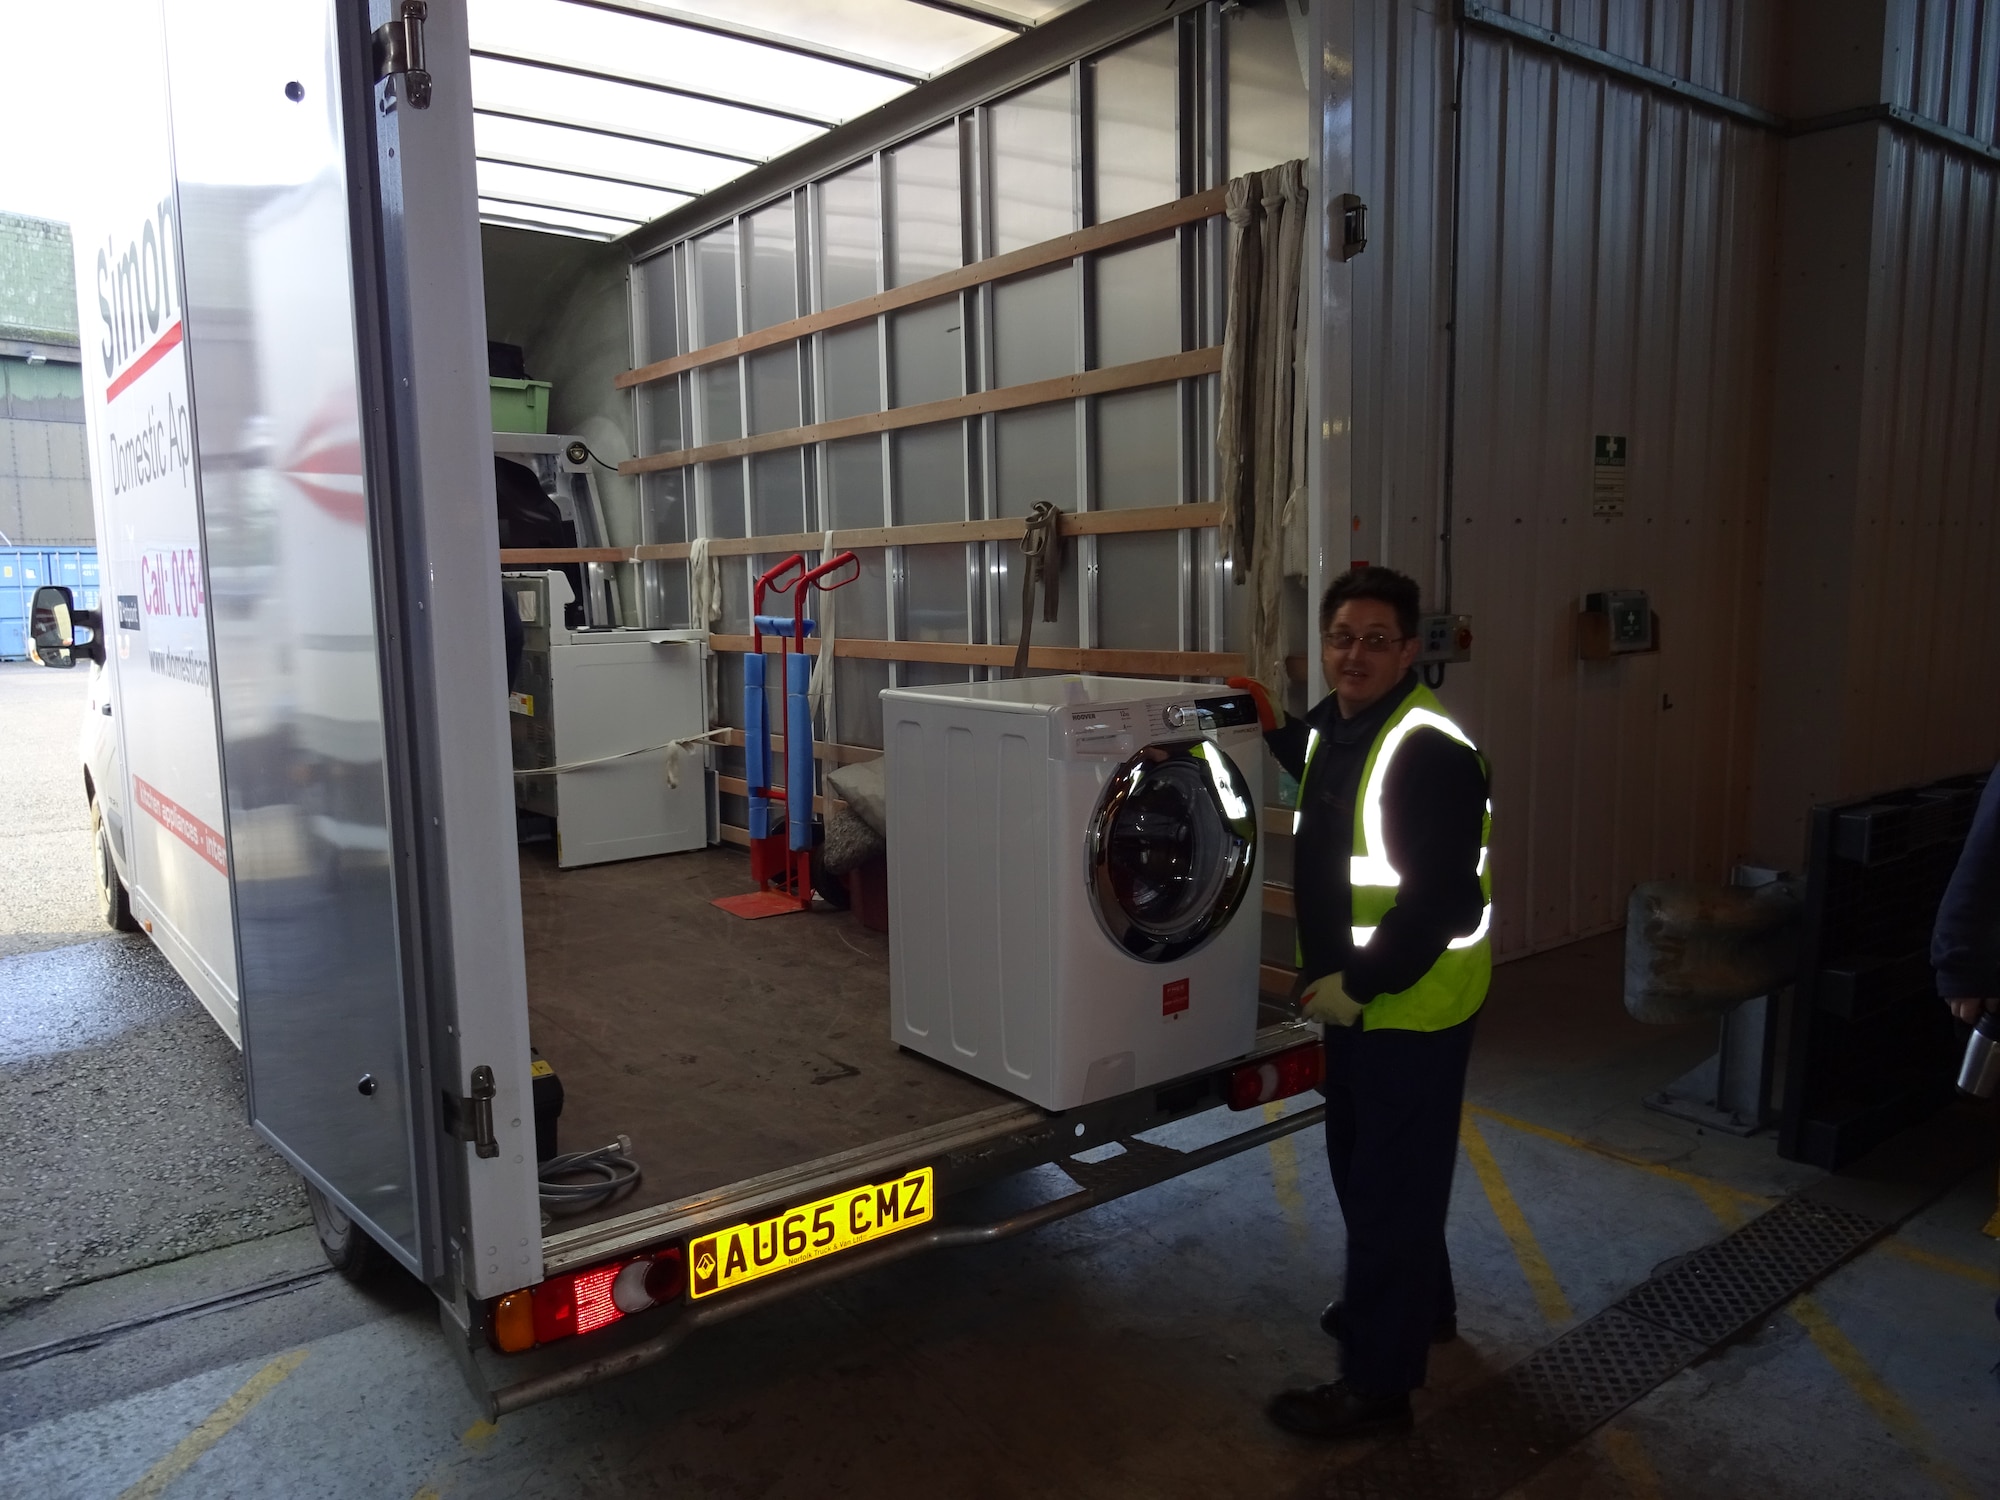 Workers from Arrowdene Moving & Storage in Thetford deliver new appliances at Royal Air Force Lakenheath, England, Jan. 13, 2016. Setting local businesses up with work on RAF Lakenheath has opened up local vendors’ options to work with U.S. agencies all across Europe. (Courtesy Photo)